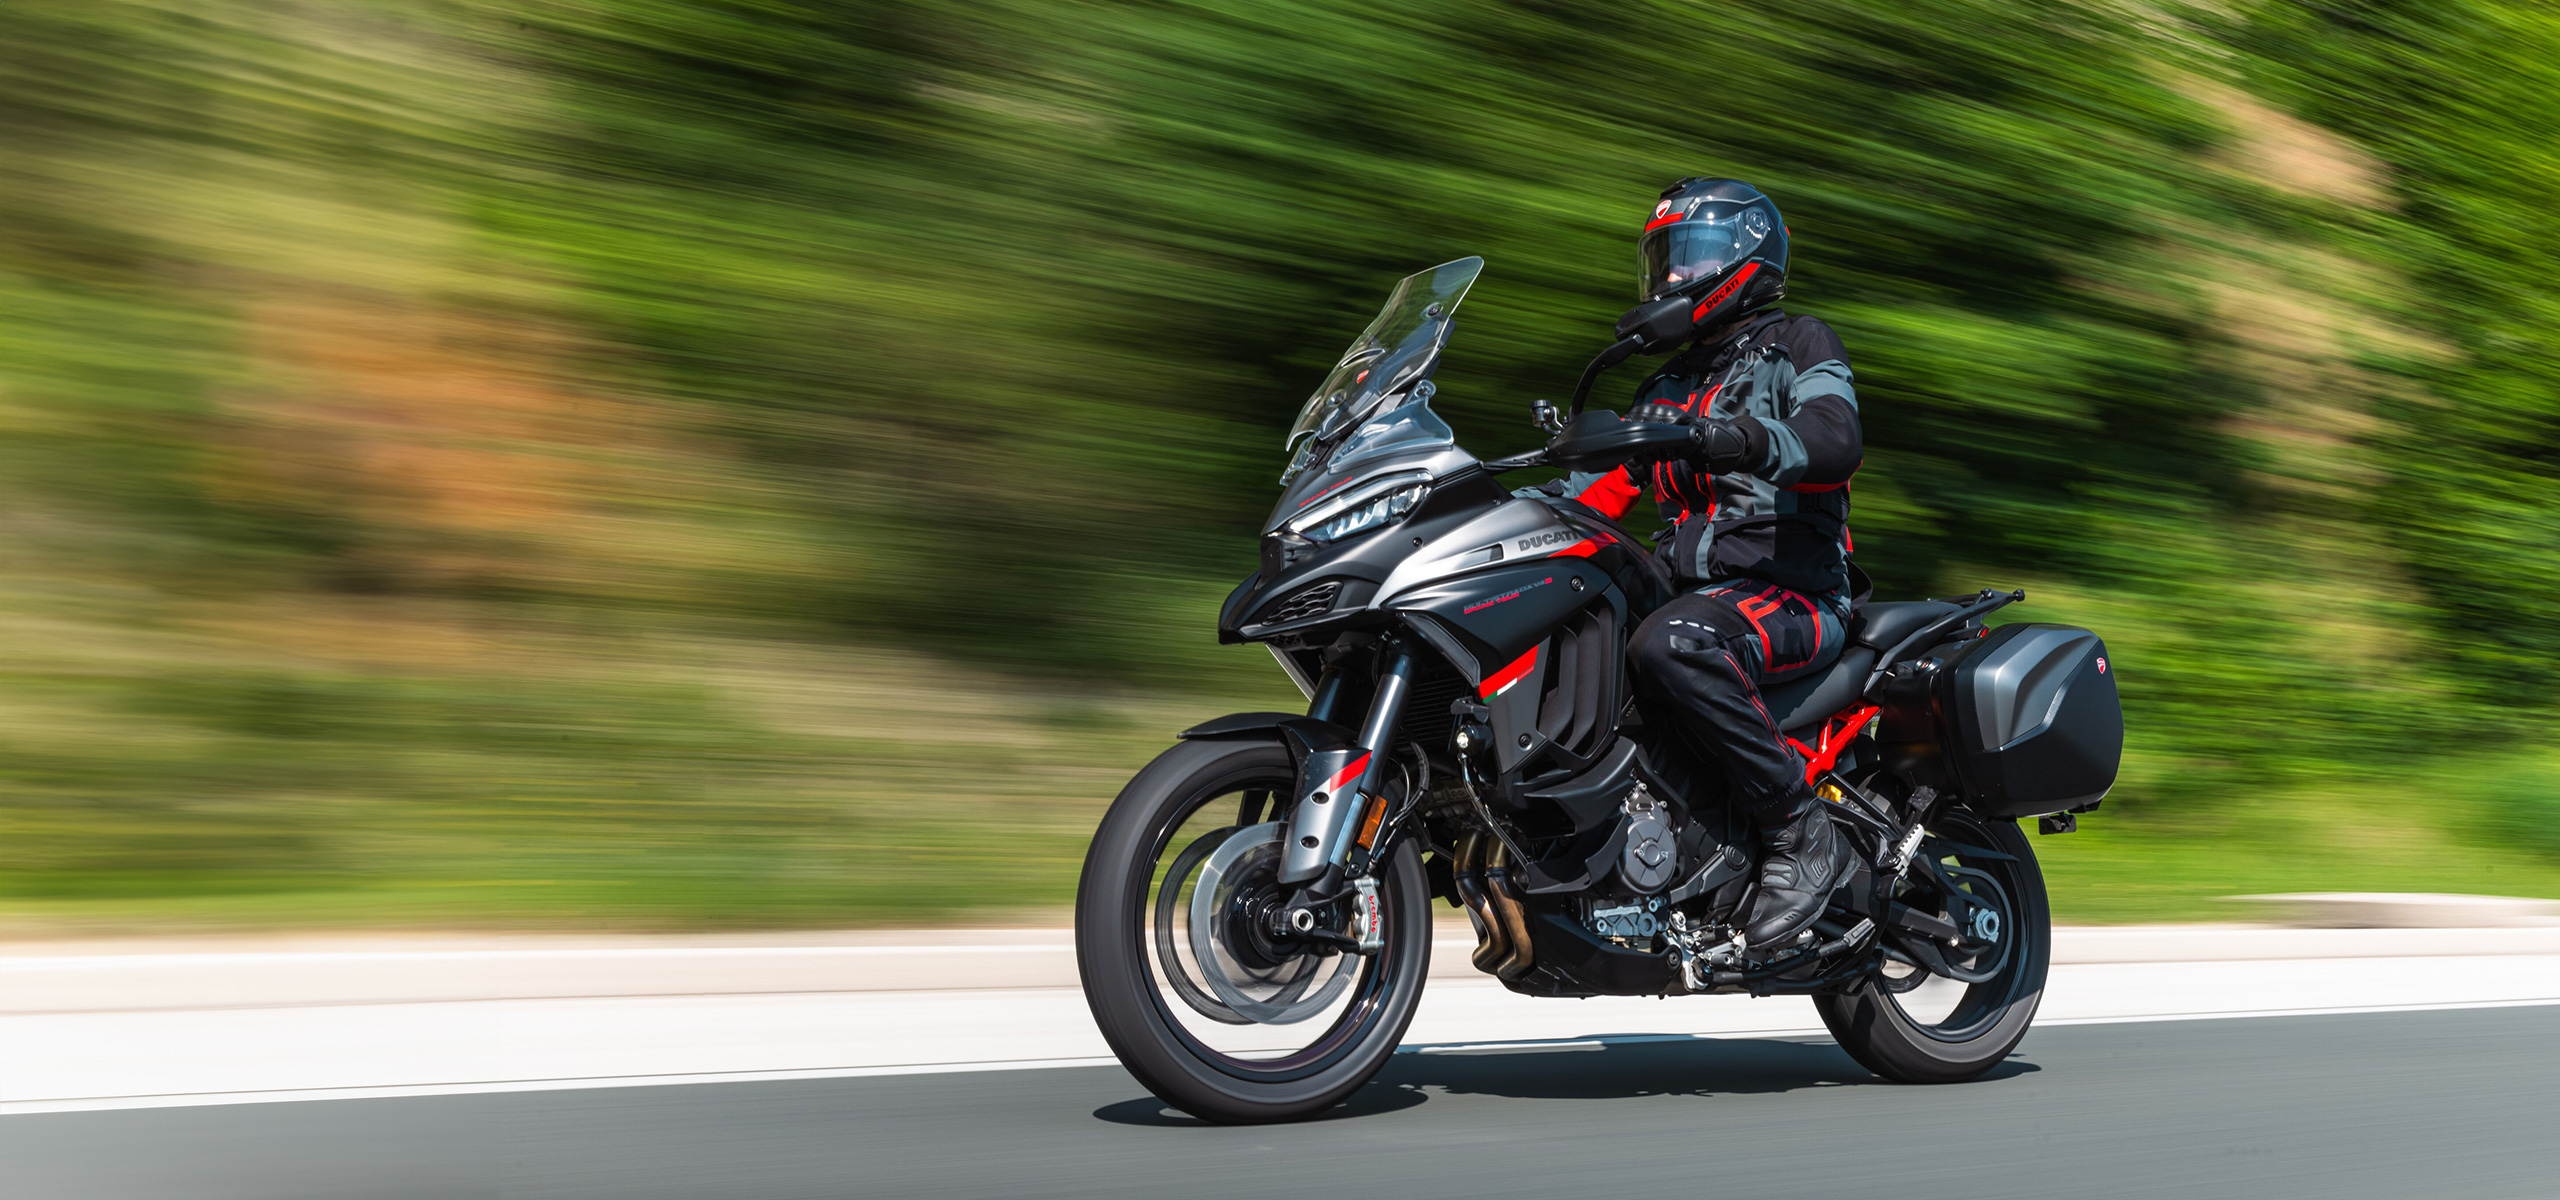 Ducati Mulstitrada V4. Get £1500 off selected new Multistrada V4 models when tradin in your current motorcycle